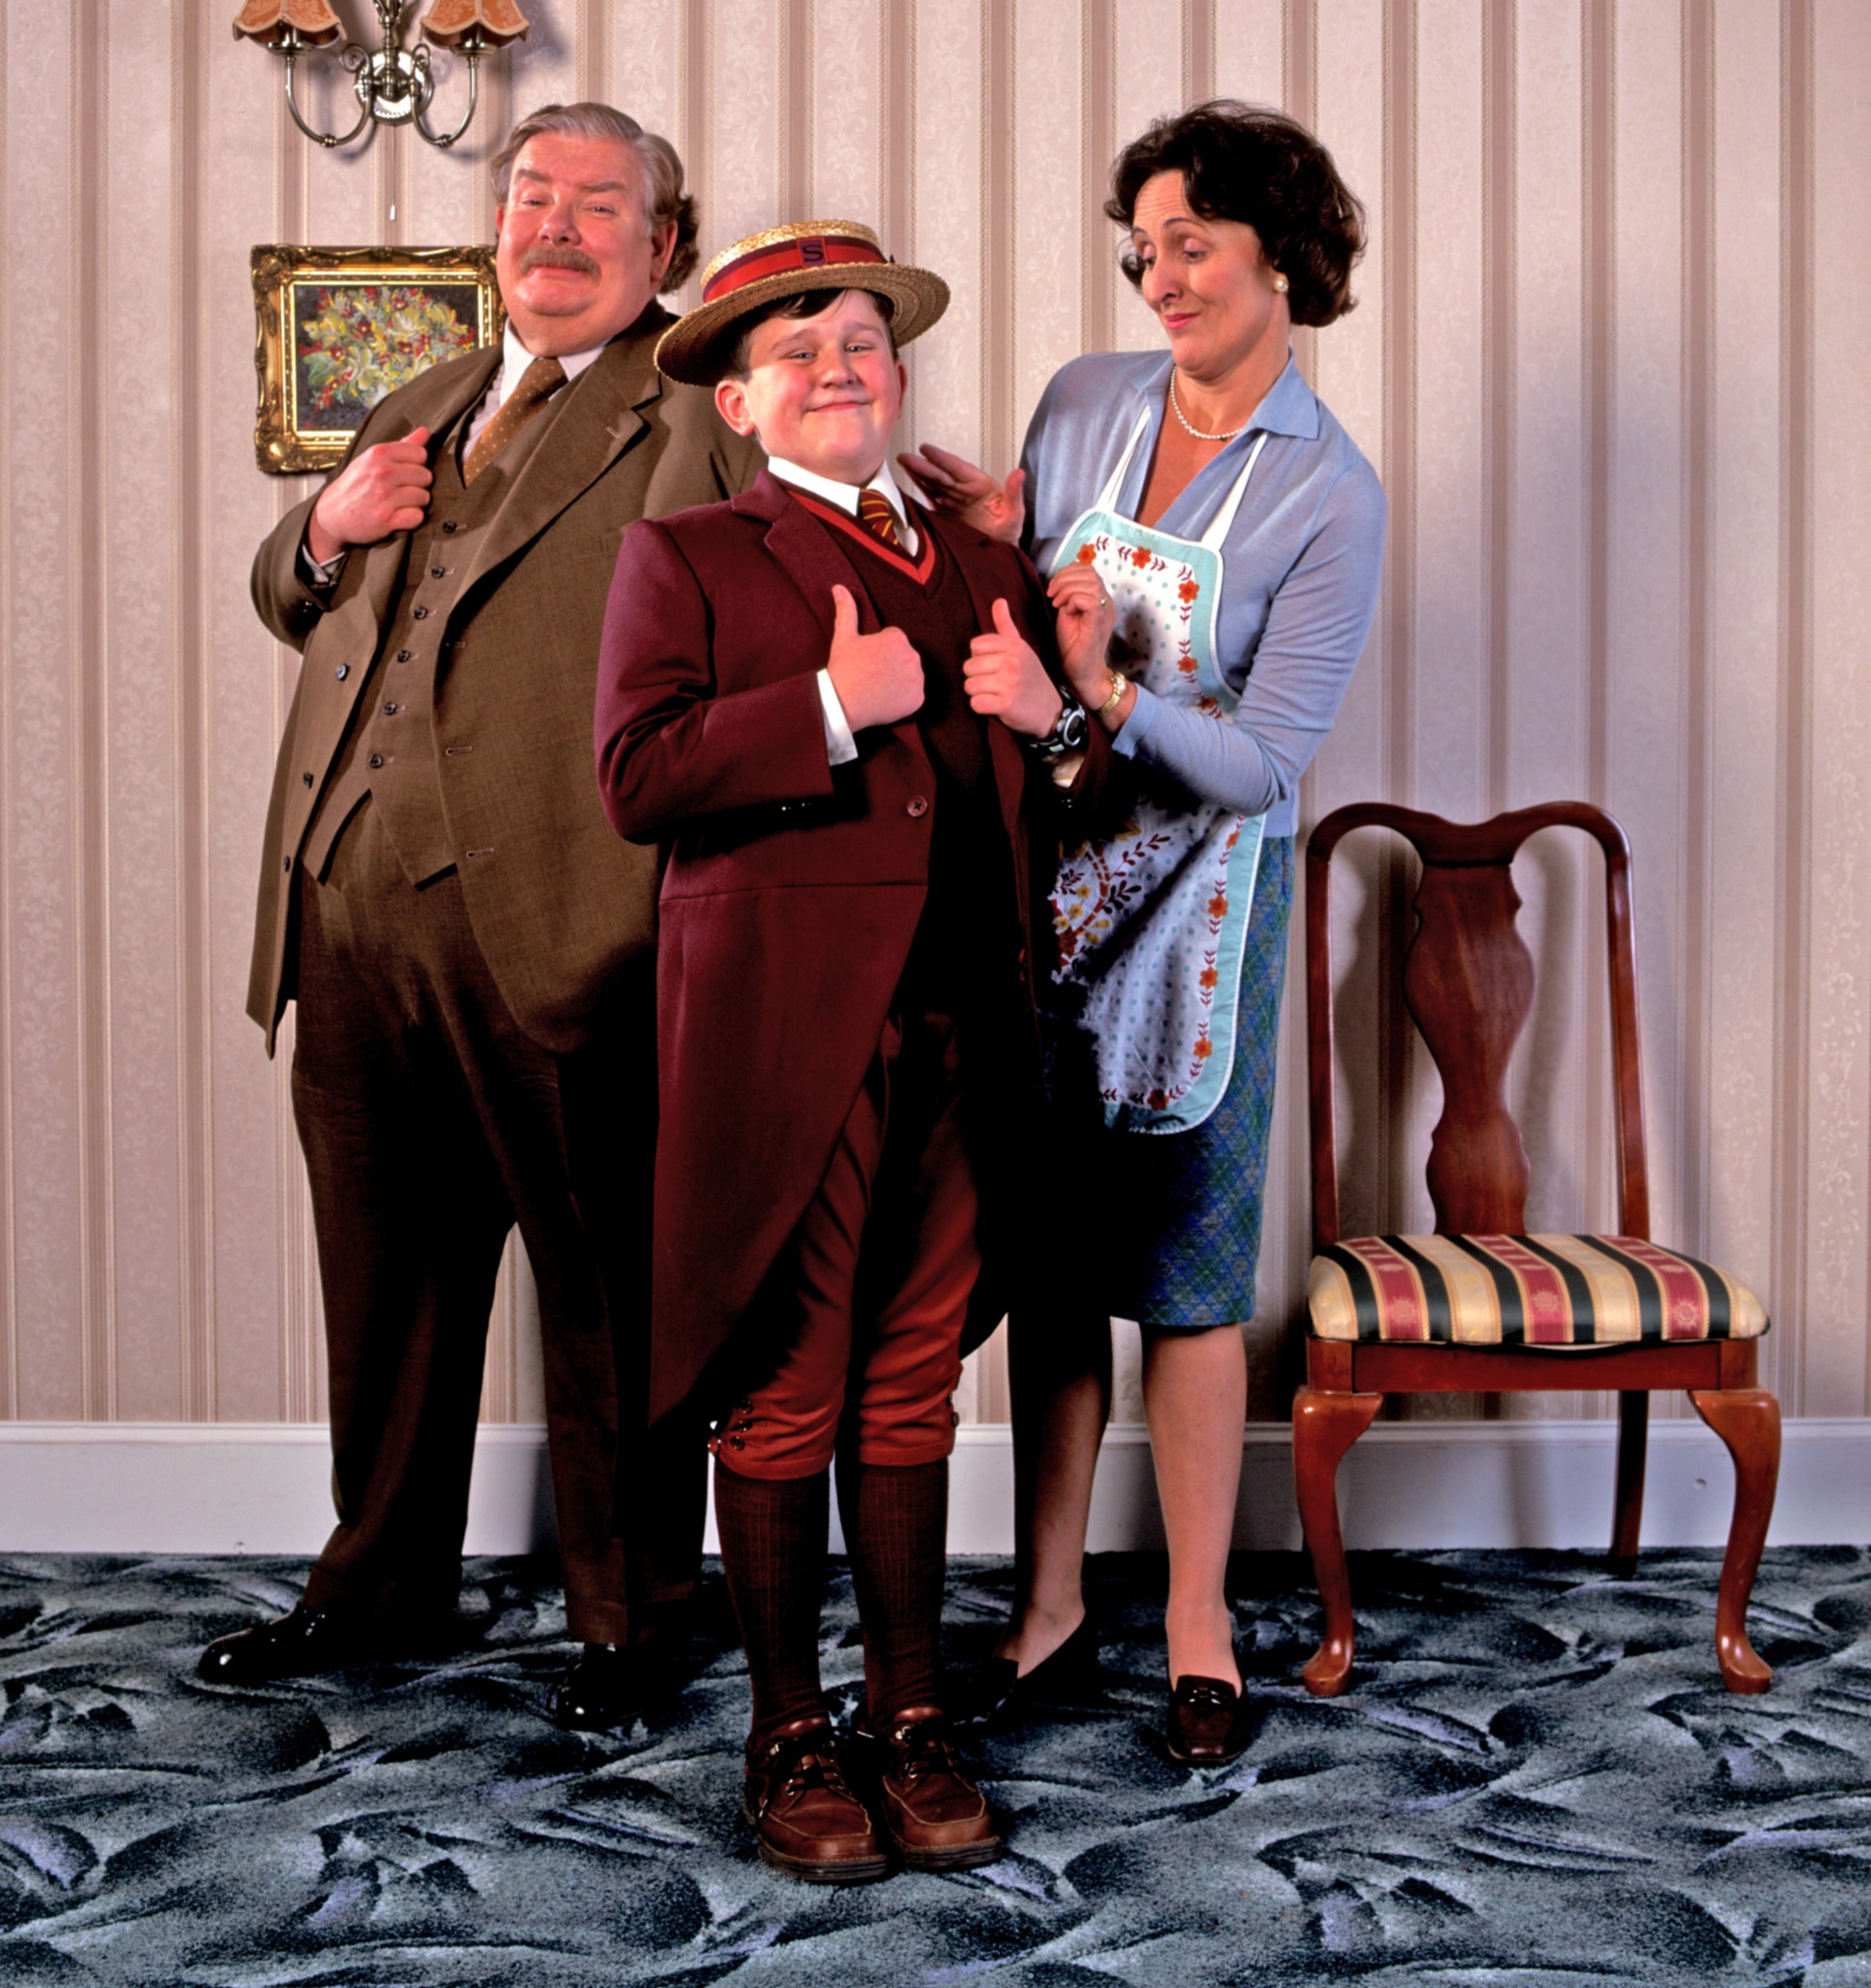 What are the traits of the Dursley's next-door neighbor?